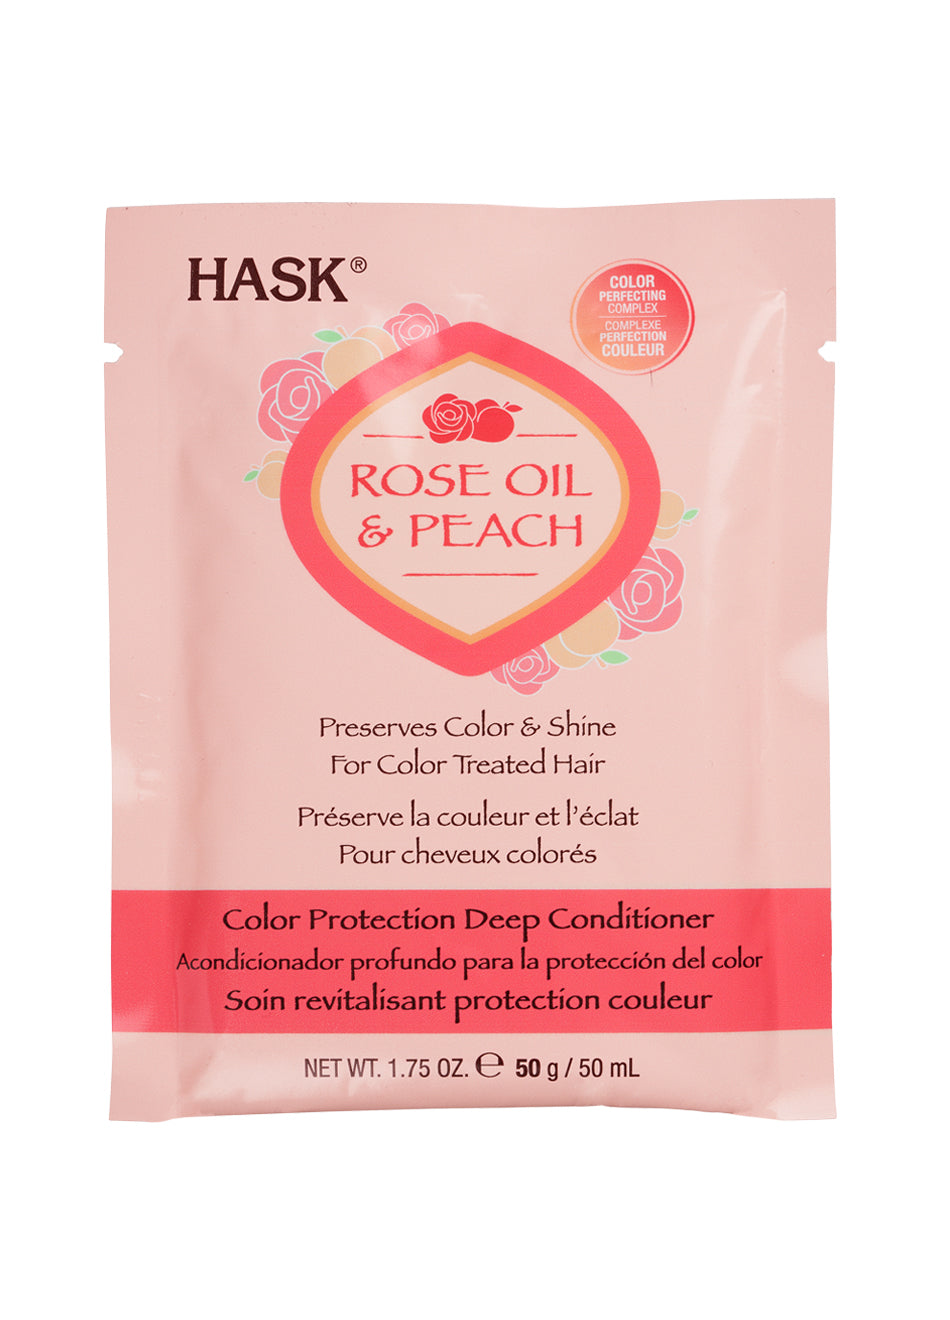 Rose Oil & Peach Color Protection Deep Conditioner Sachet